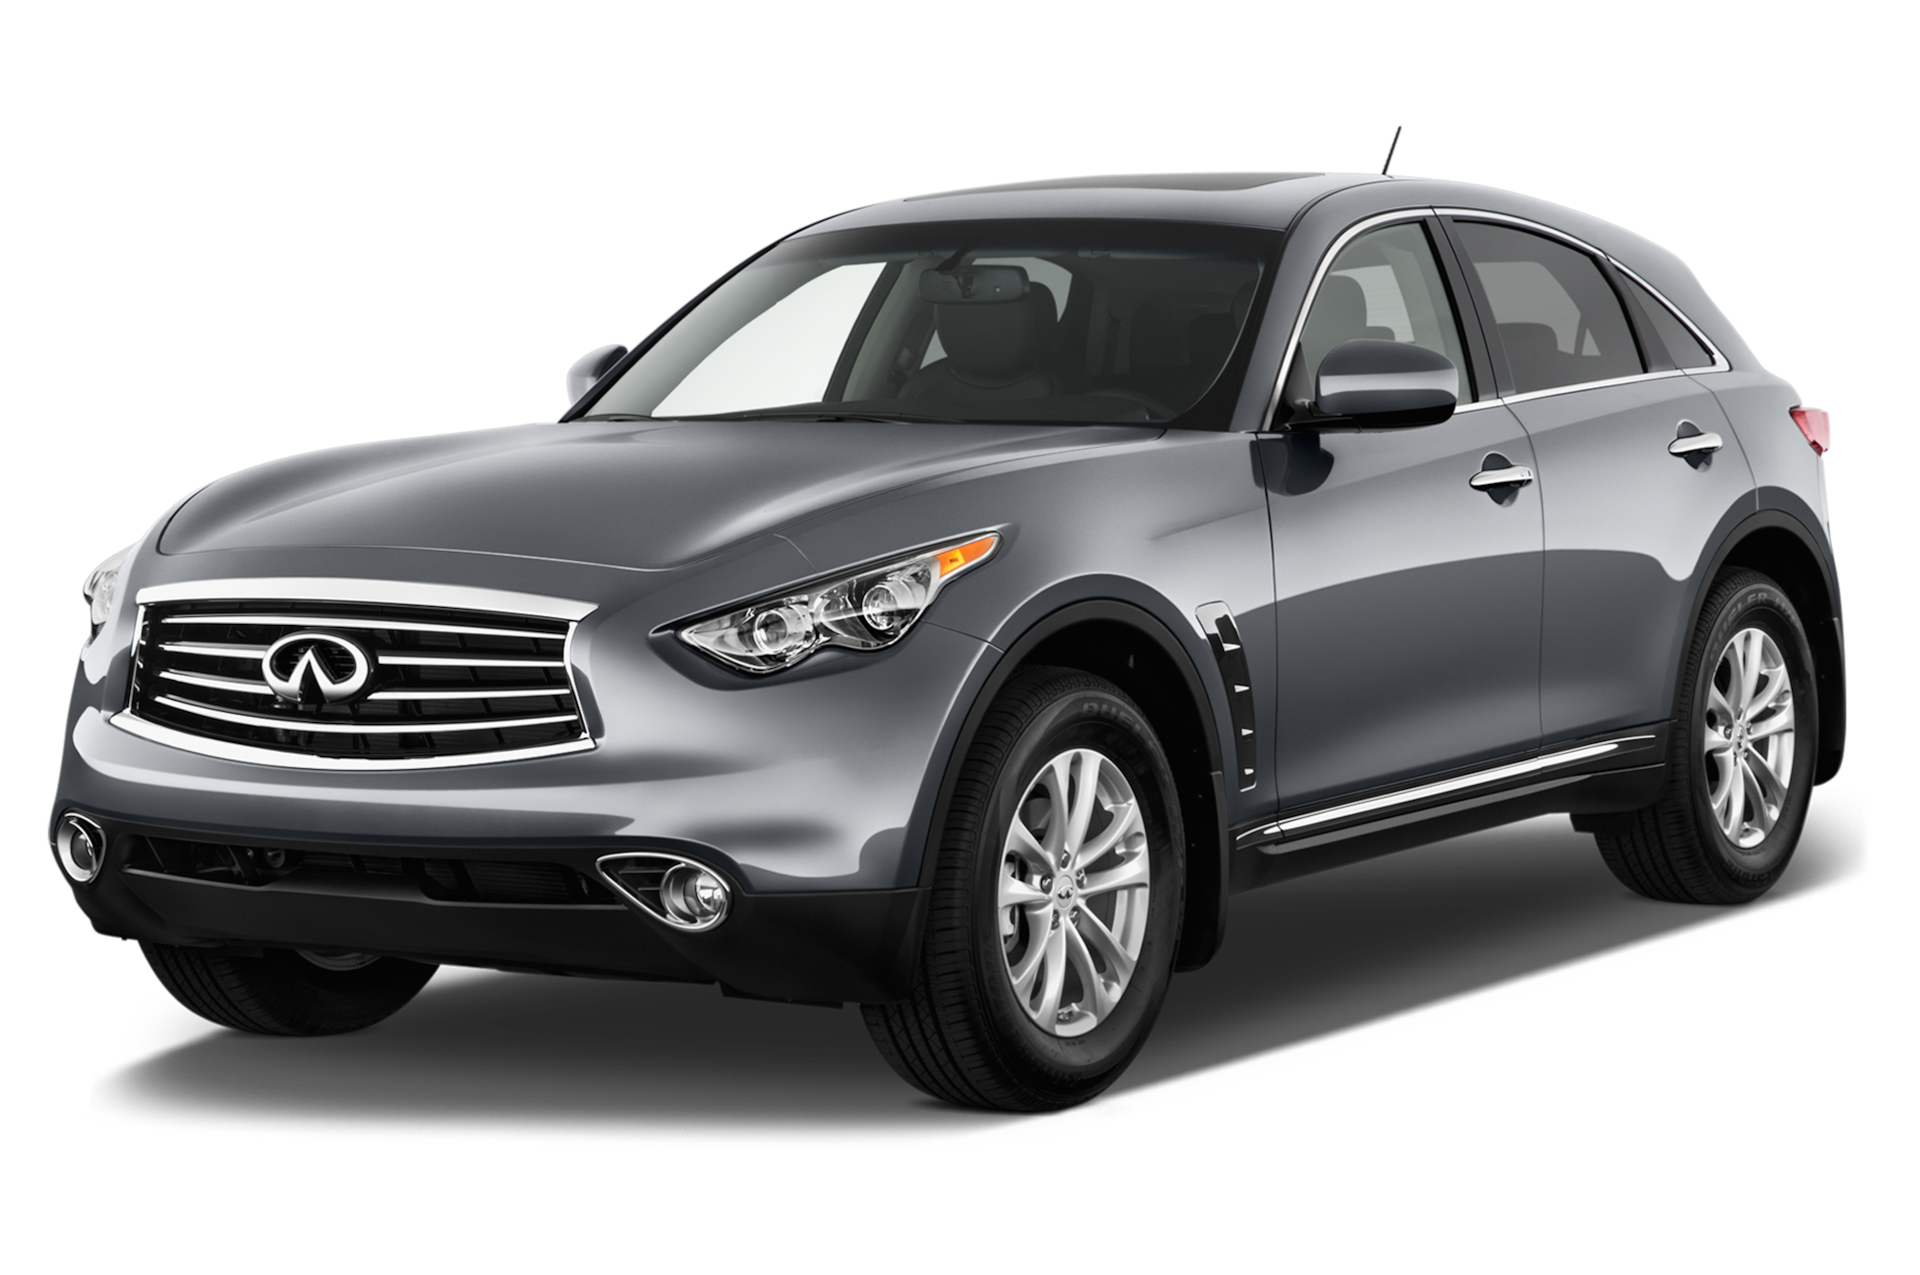 2012 Infiniti FX35 Prices, Reviews, and Photos - MotorTrend